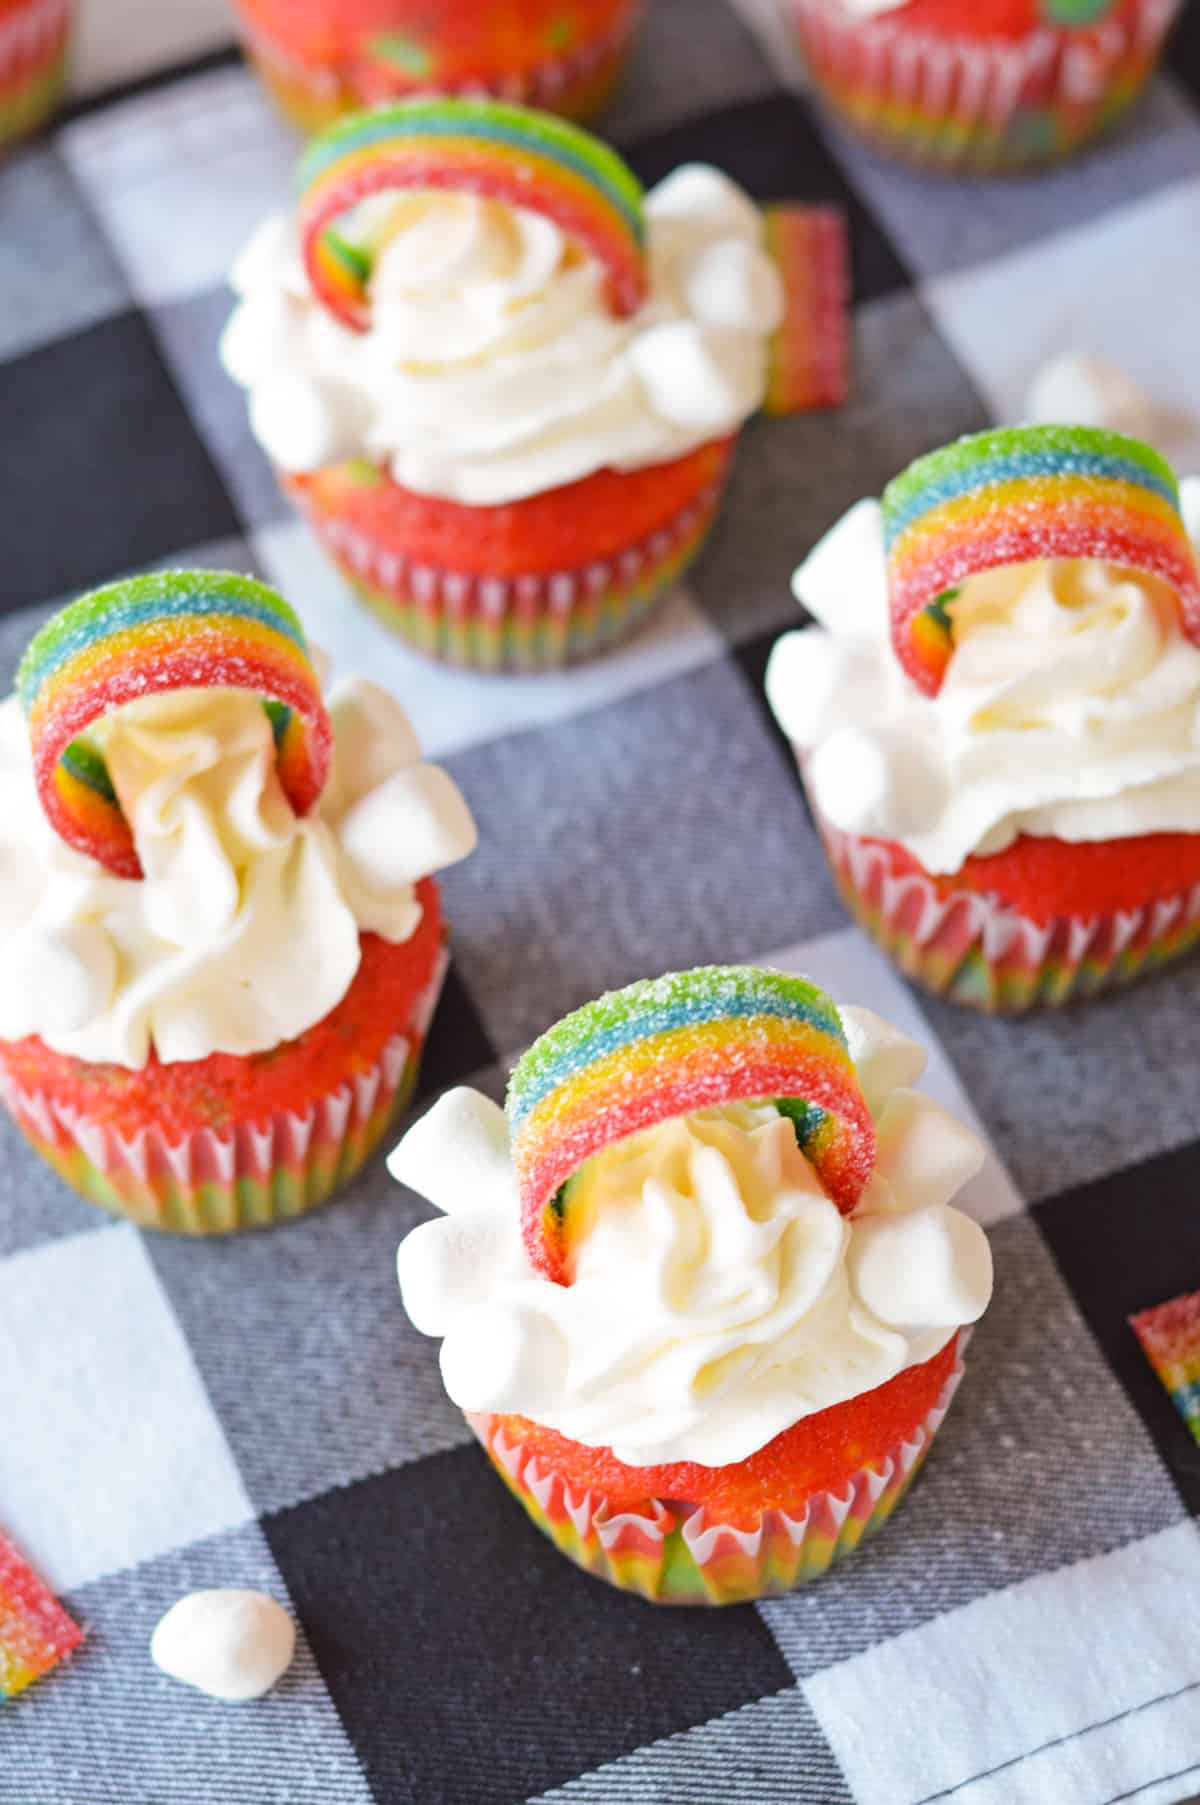 Four cupcakes decorated with rainbows, miniature marshmallows, and white frosting on top.